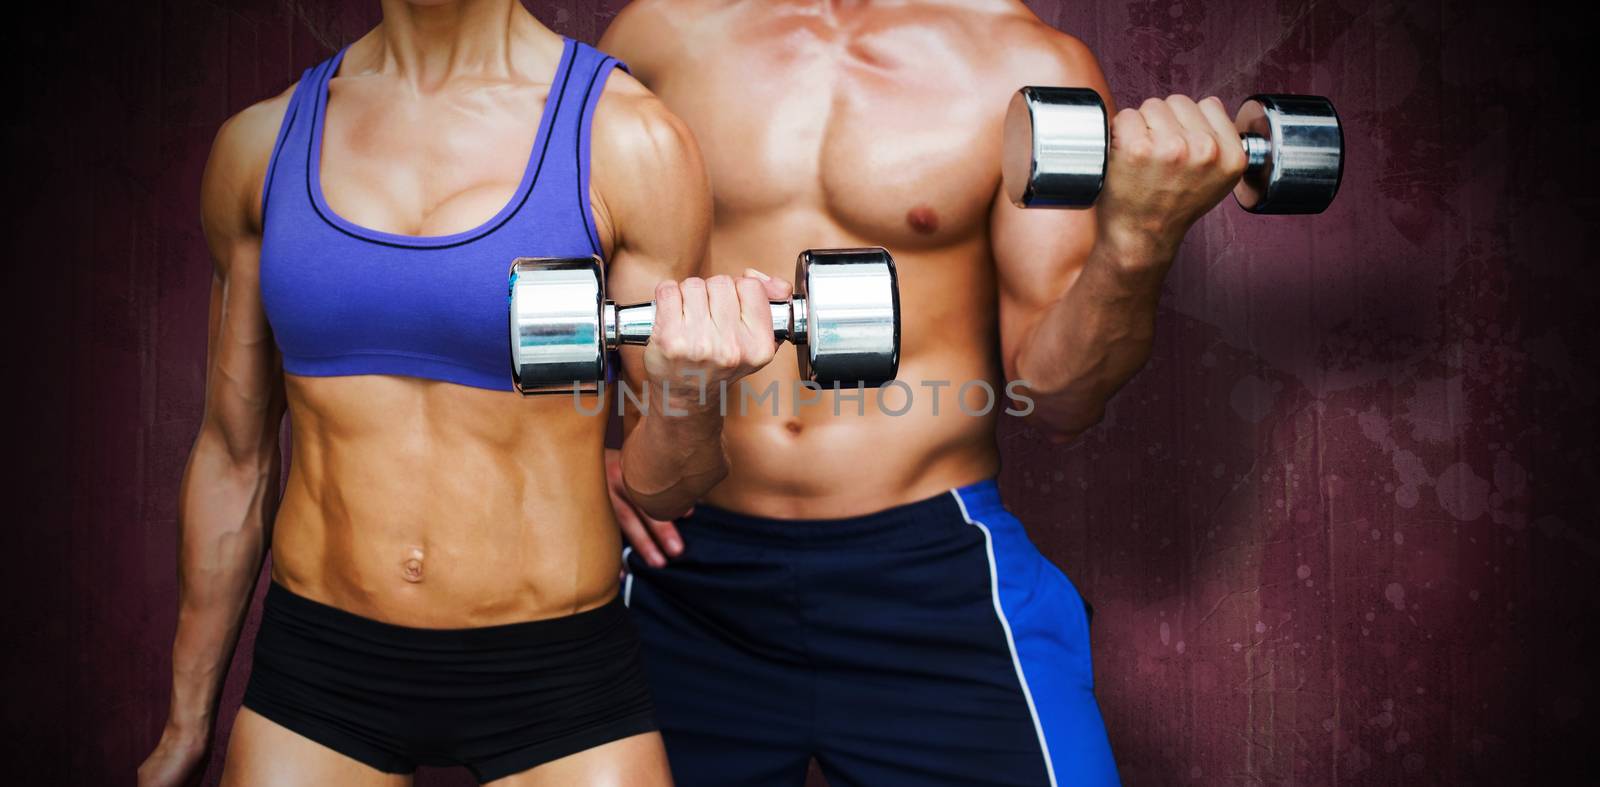 Bodybuilding couple against red paint splashed surface